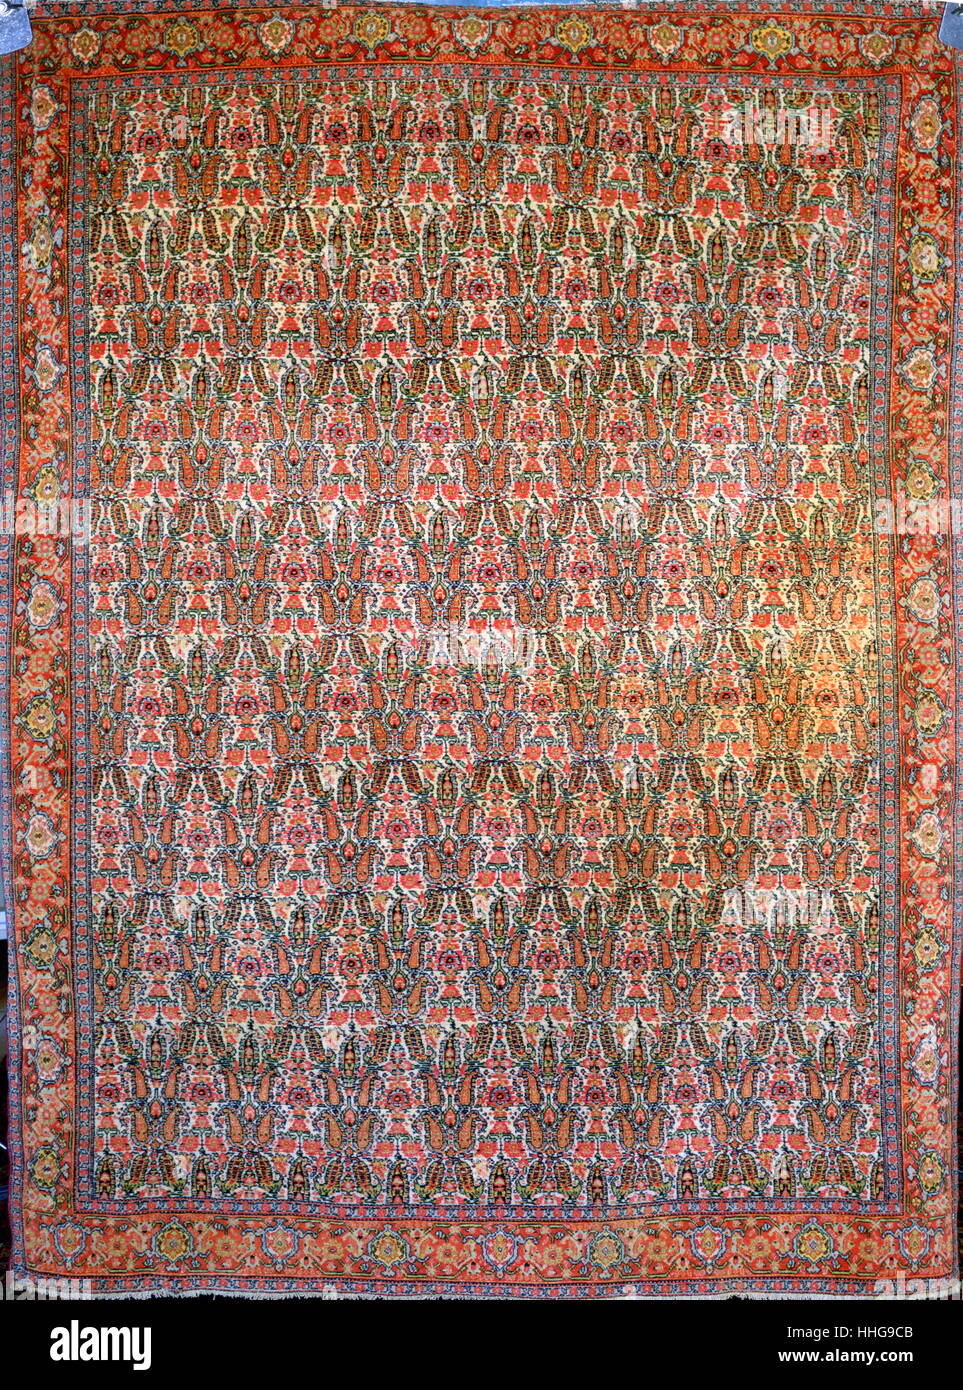 Islamic art: carpet from Persia (Iran), late 19th century, contains detailed fleurette patterns (Senneh work). Stock Photo